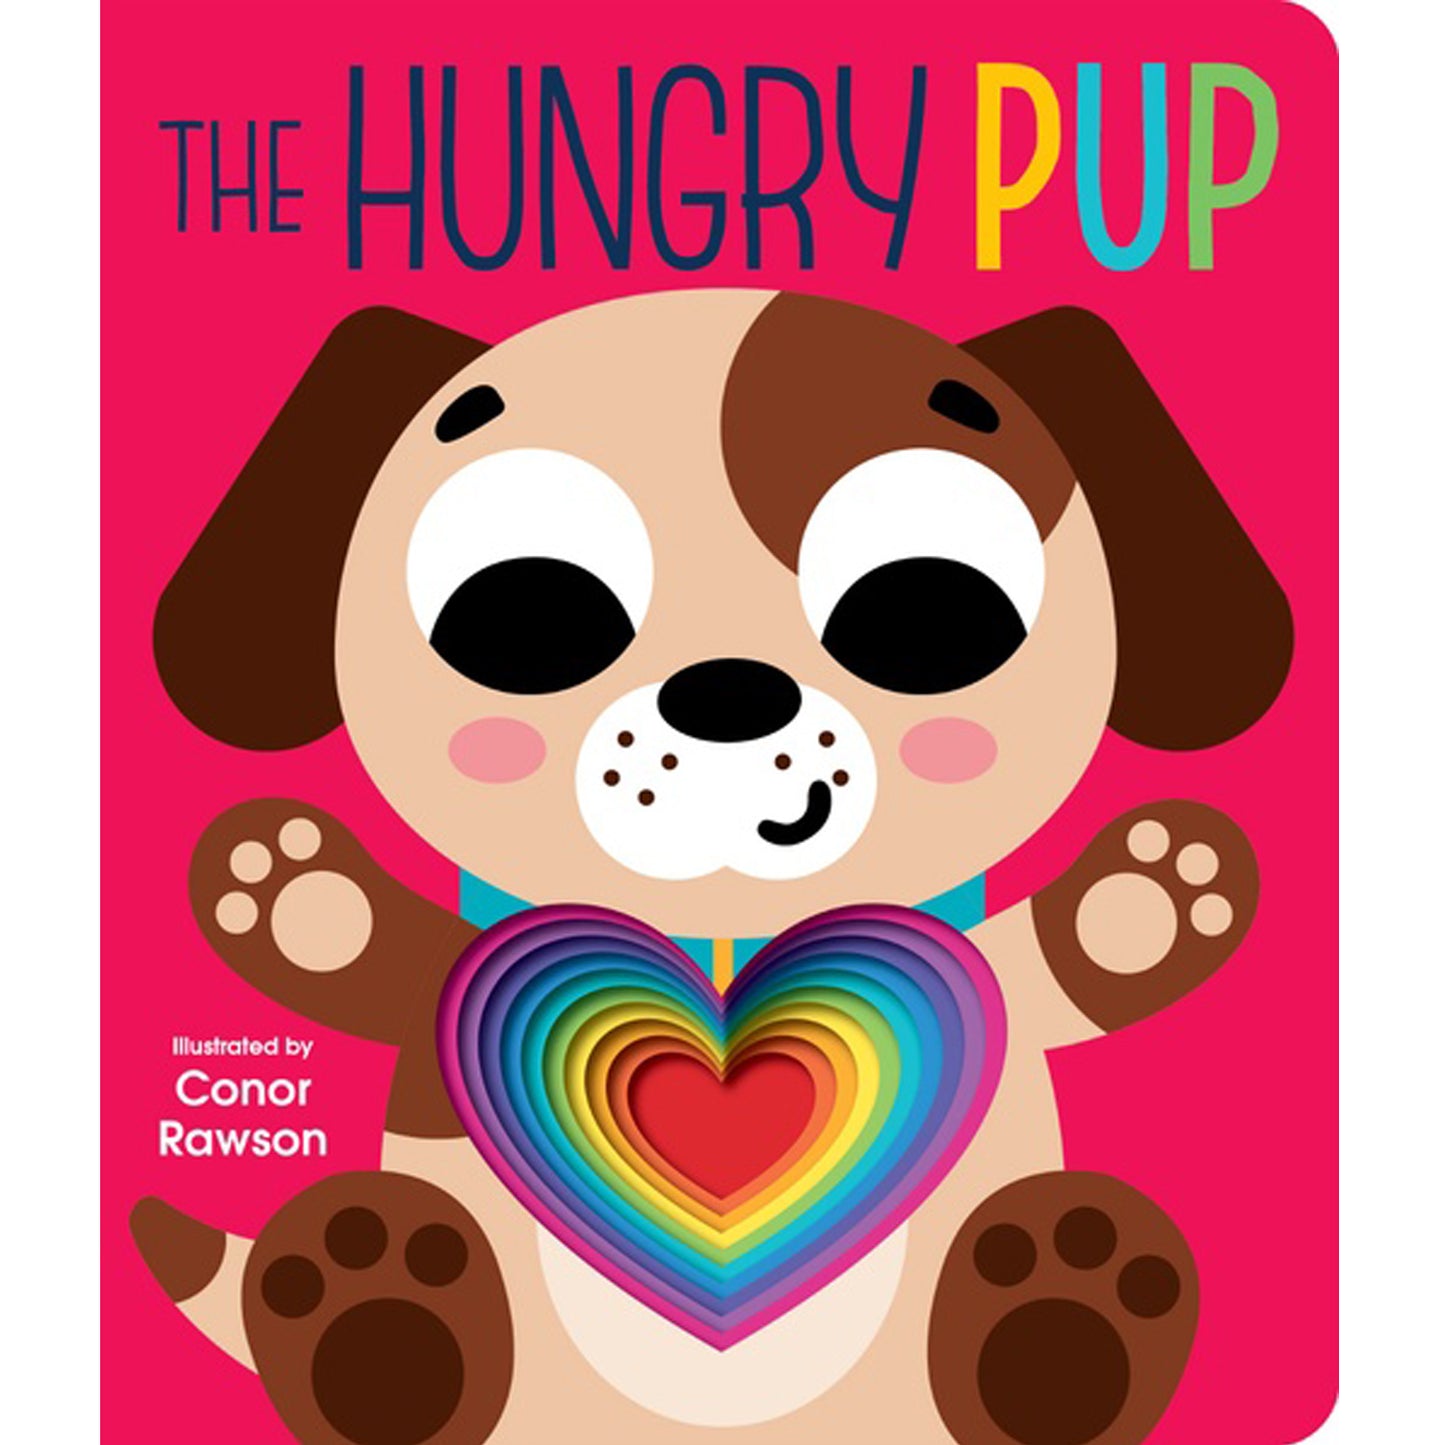 Graduating Board Book – The Hungry Pup | Children's books about digs | Early learning books | Board books | Die cut board books Parragon